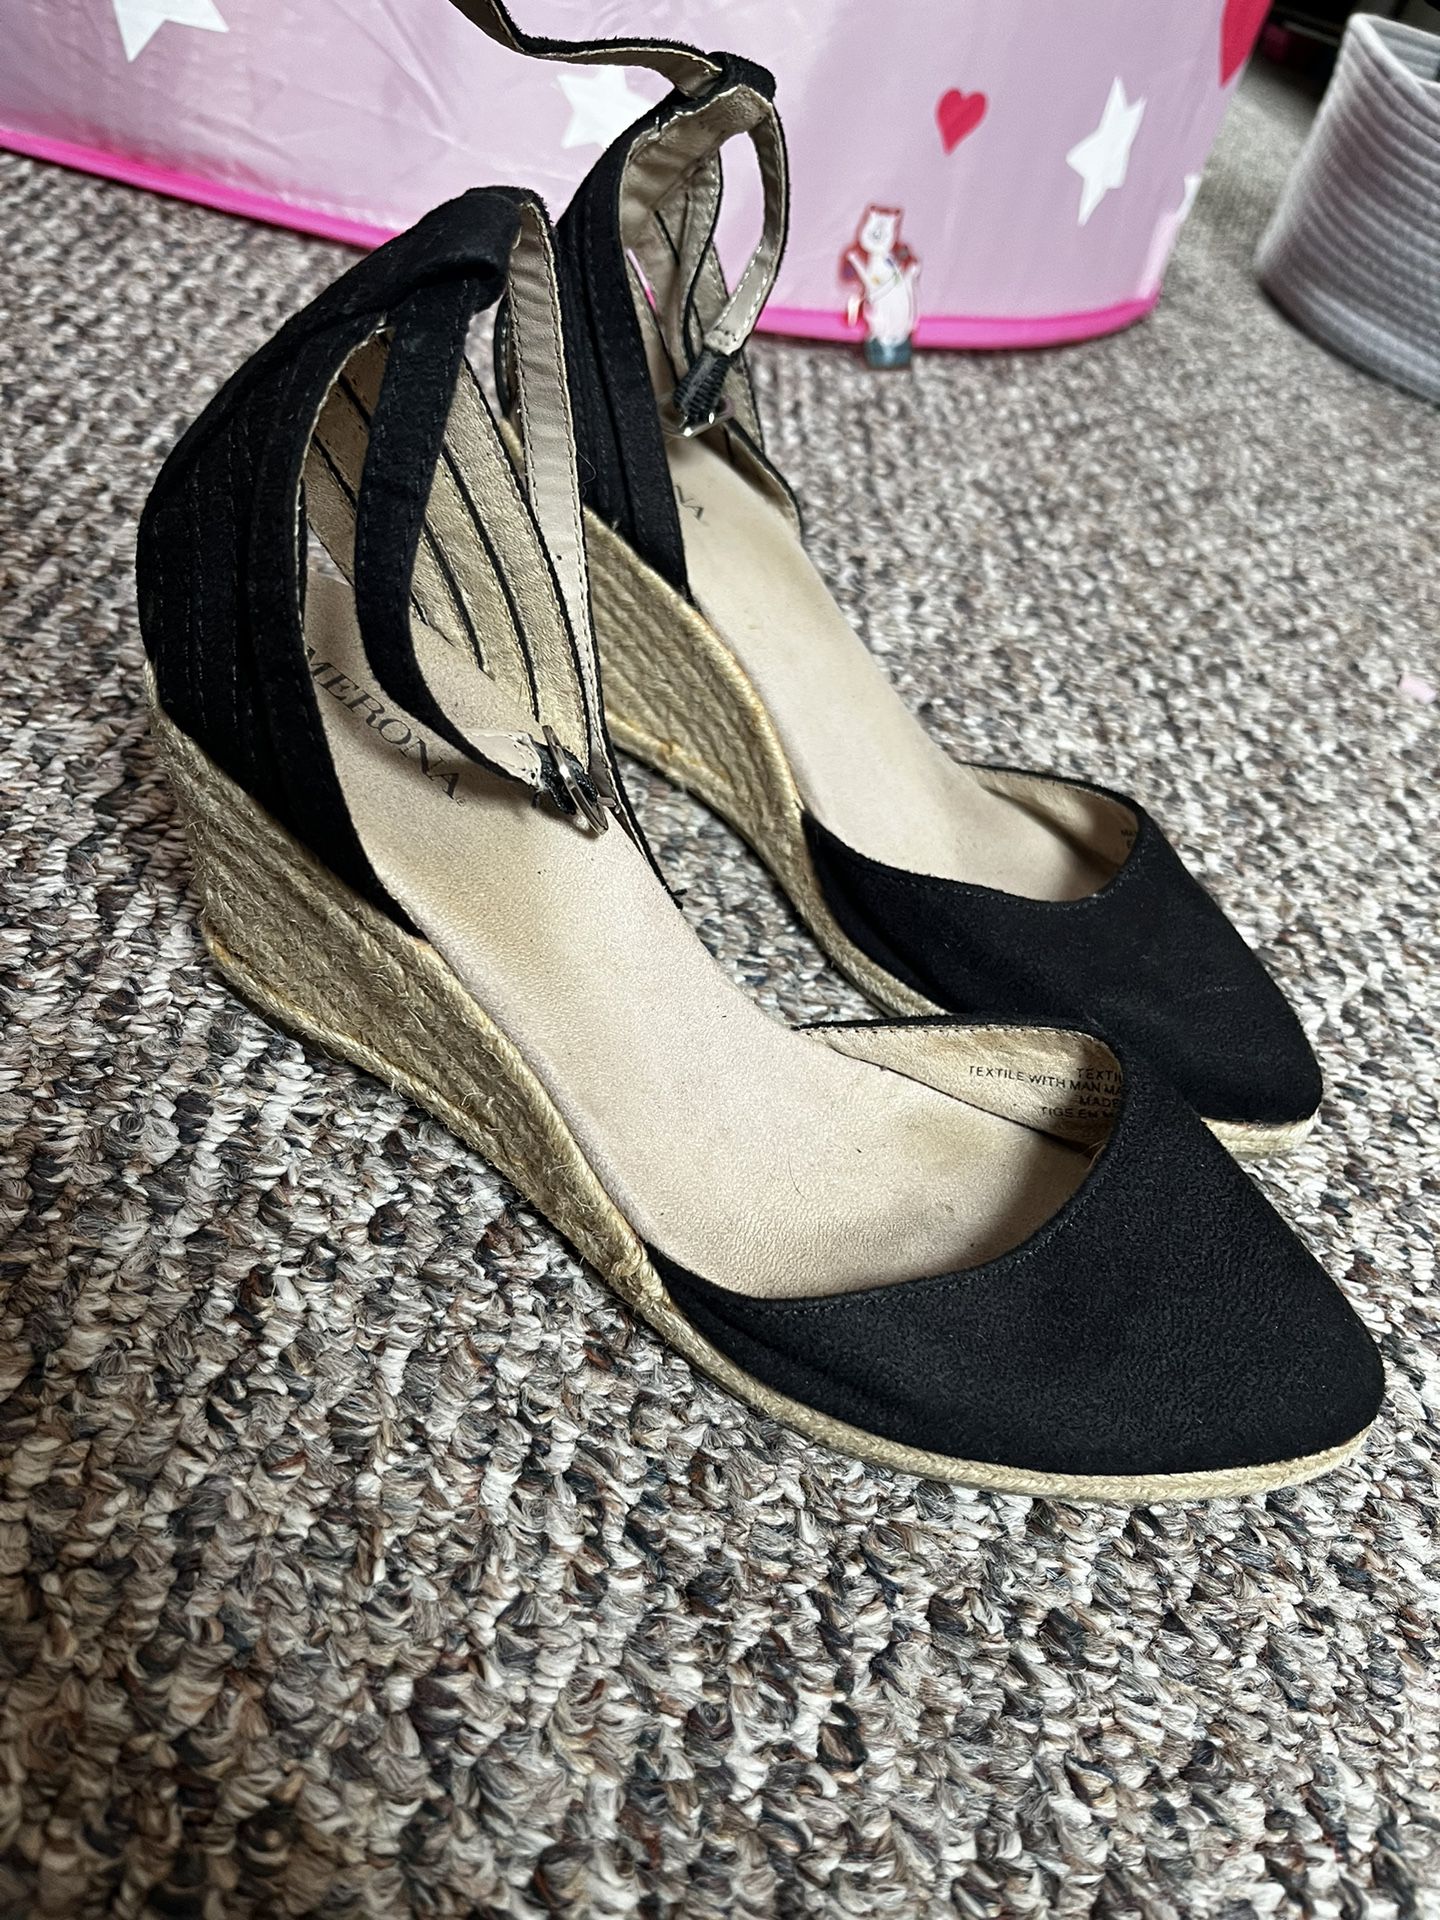 Womens Wedges Size 7.5